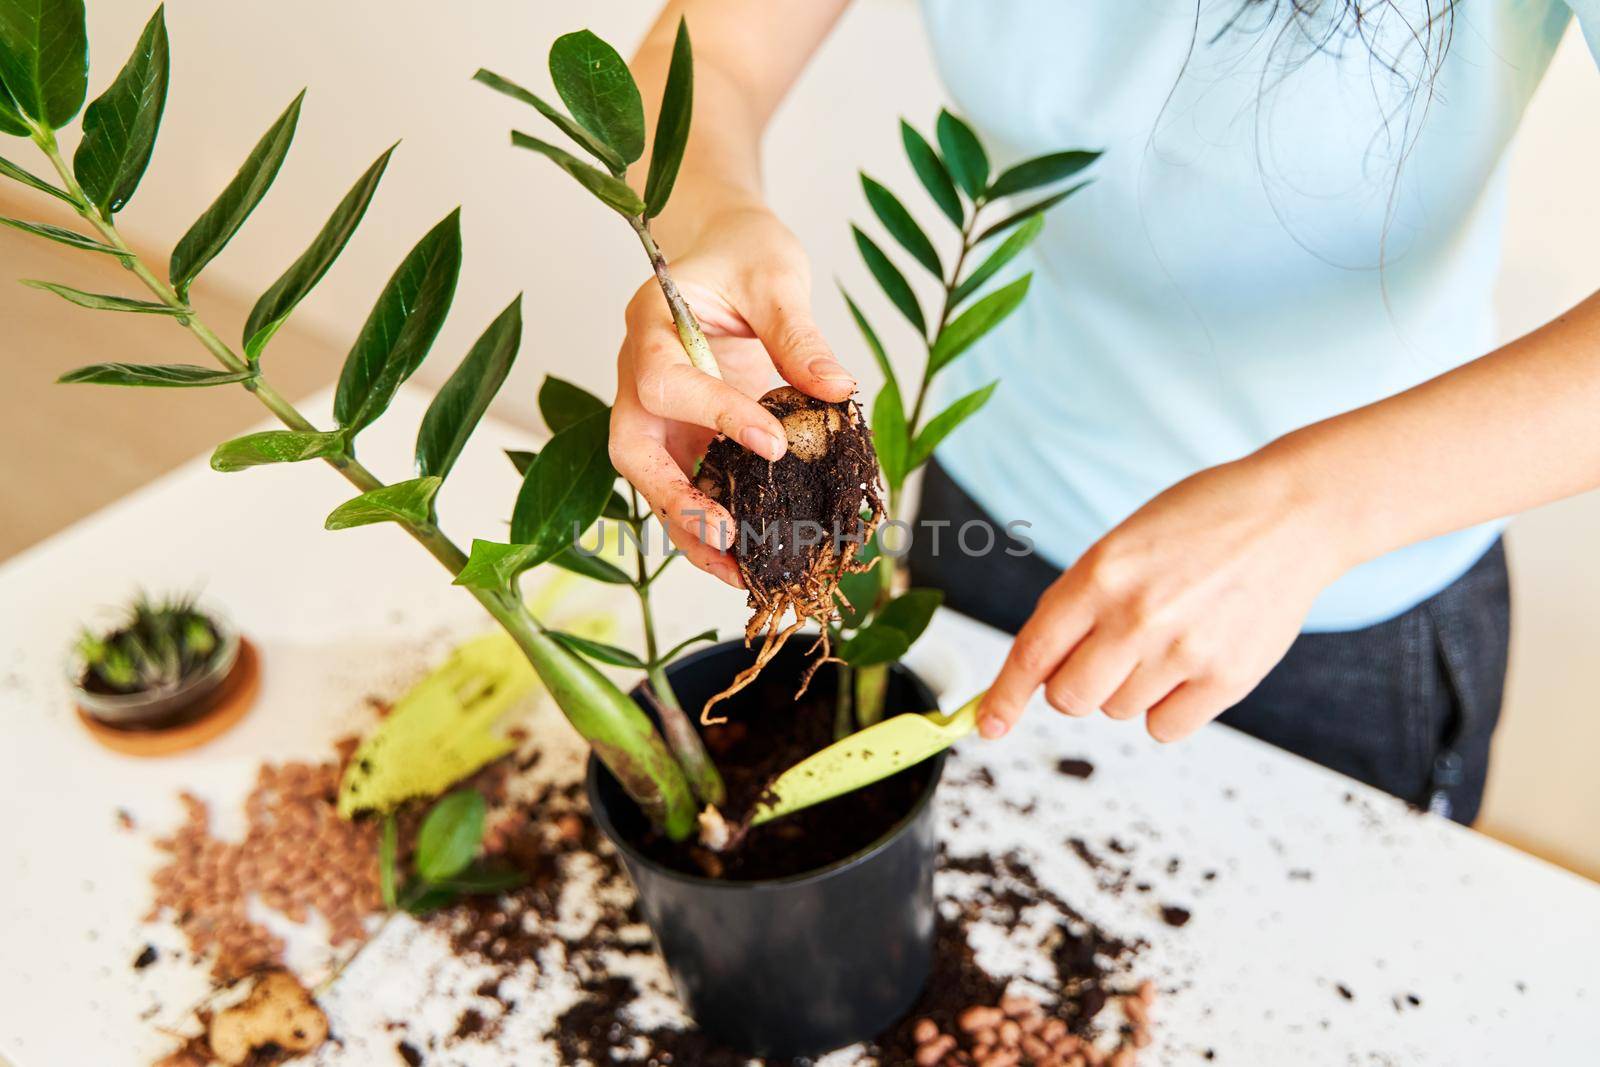 The girl will transplant a home flower because it has grown too large to fit in a pot by Try_my_best